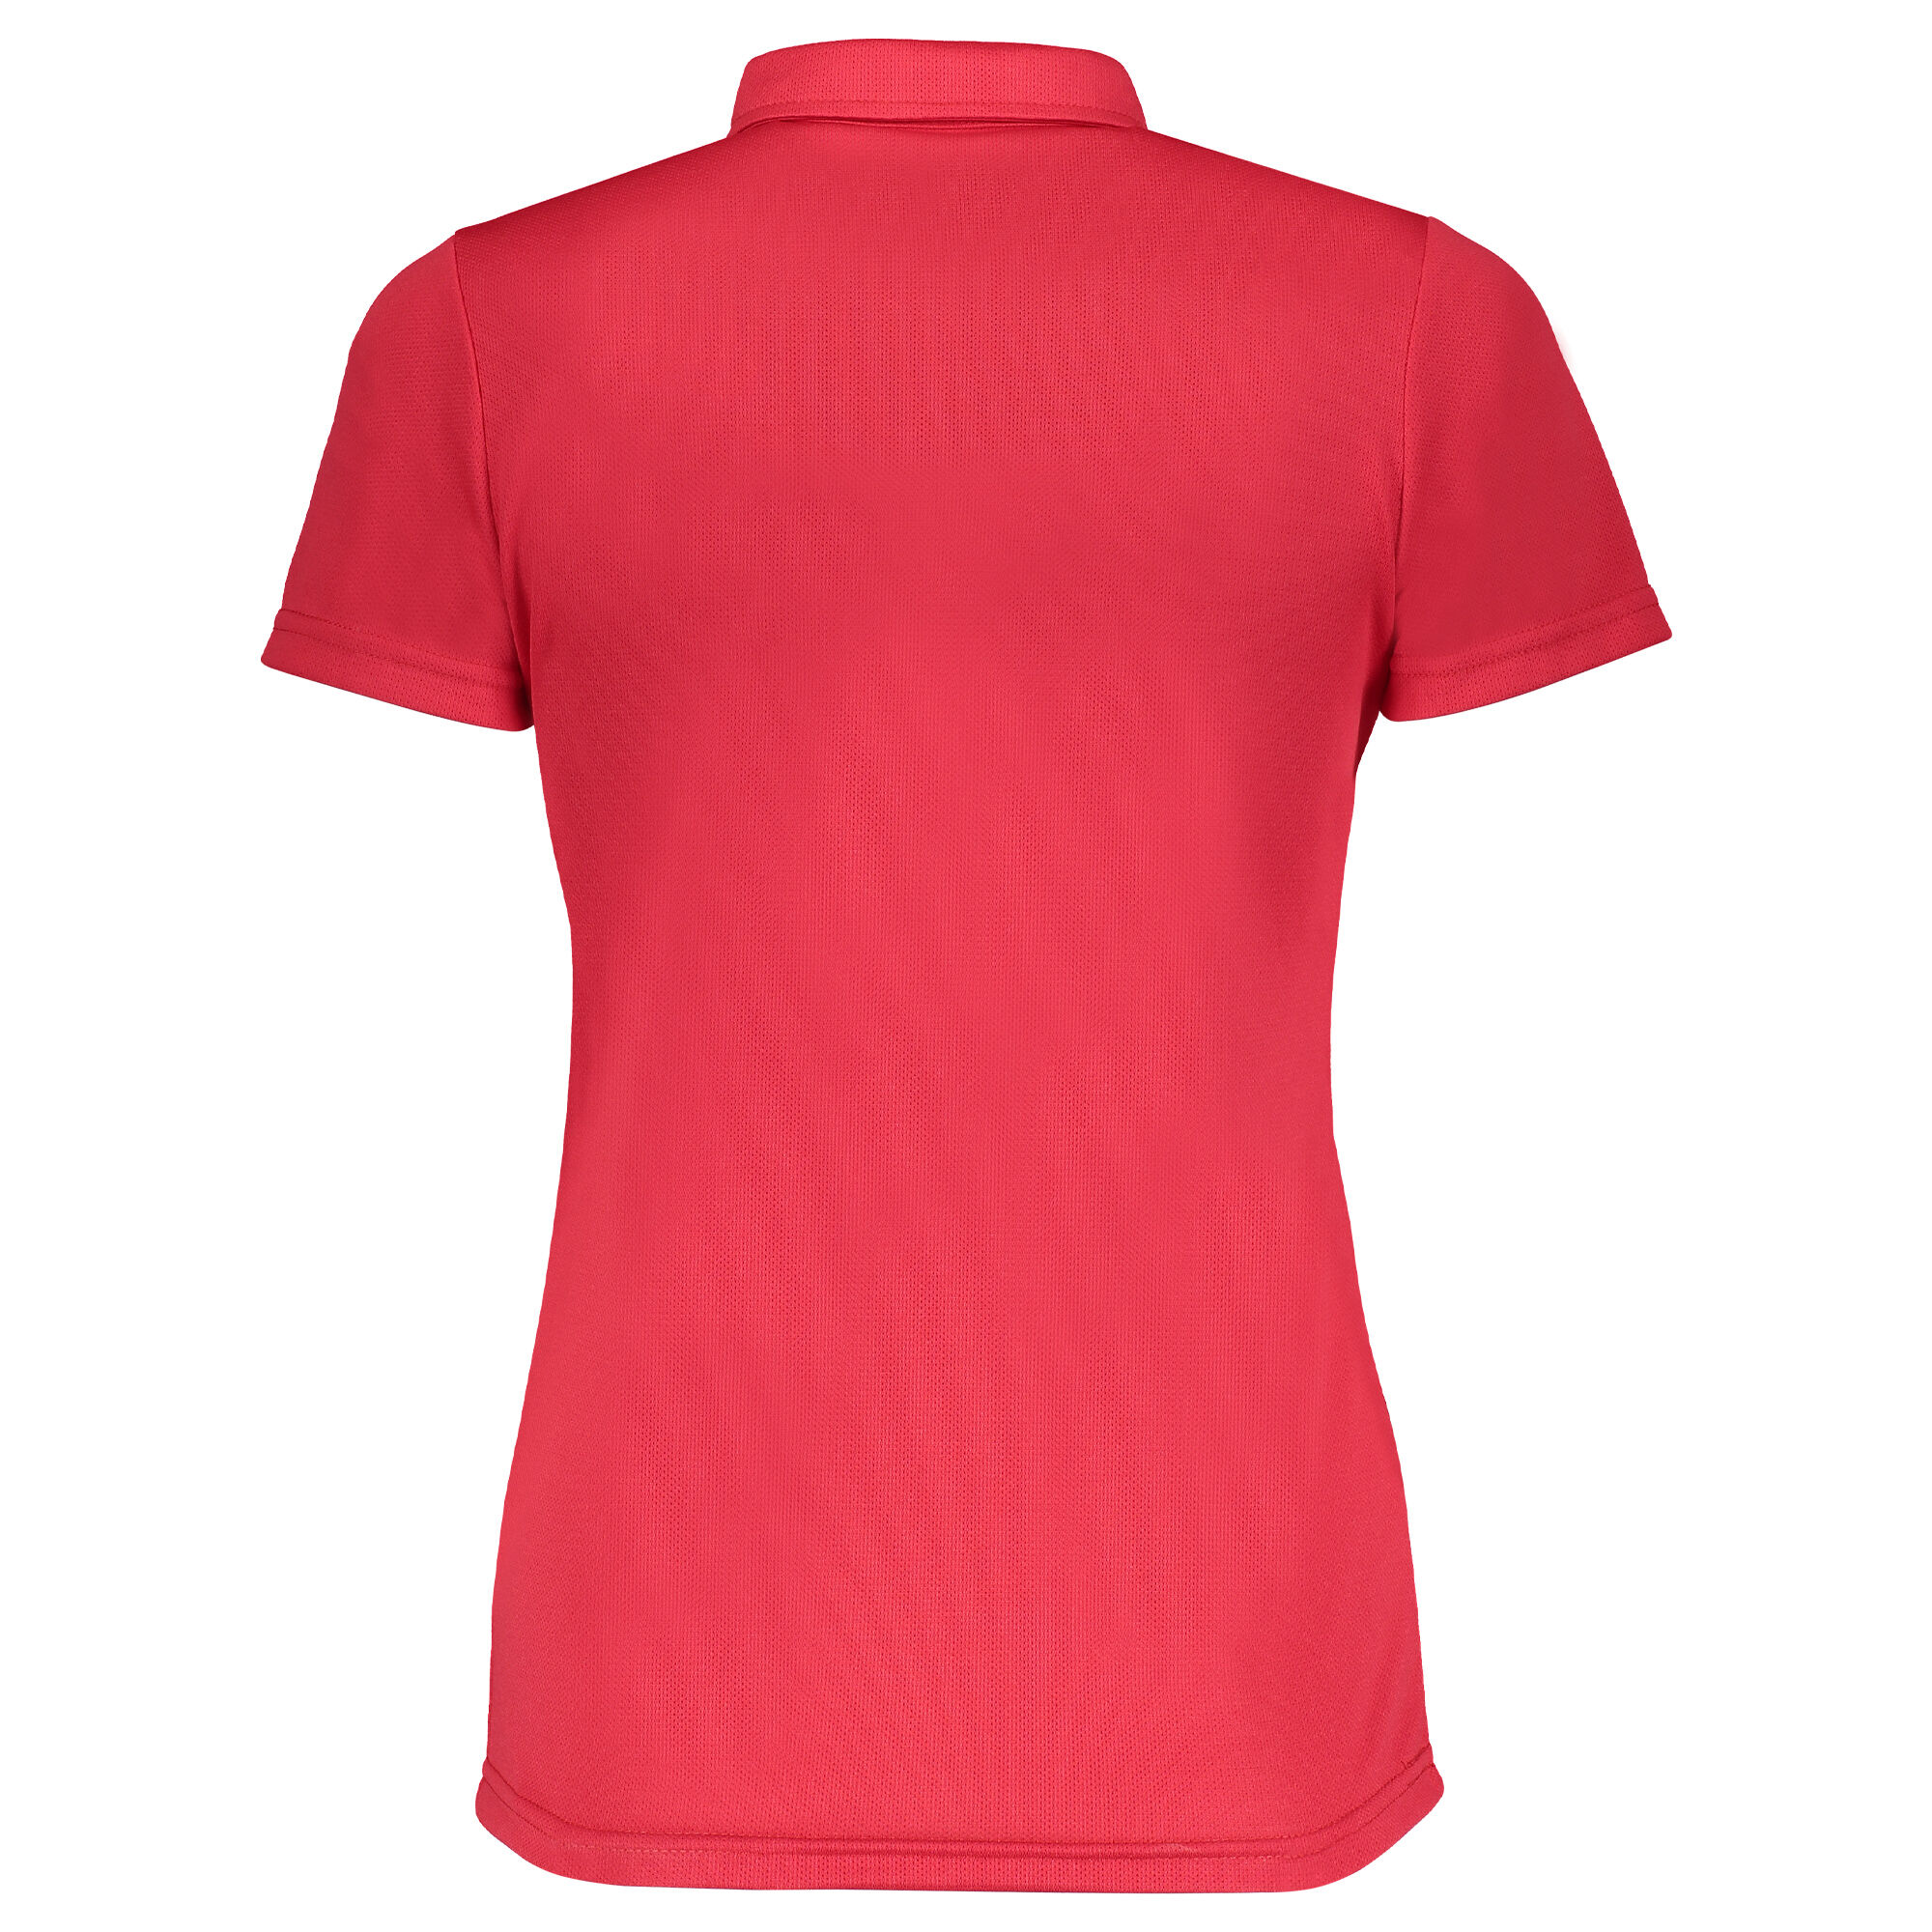 Polo shirt short-sleeve leisure Spanish Olympic Committee woman